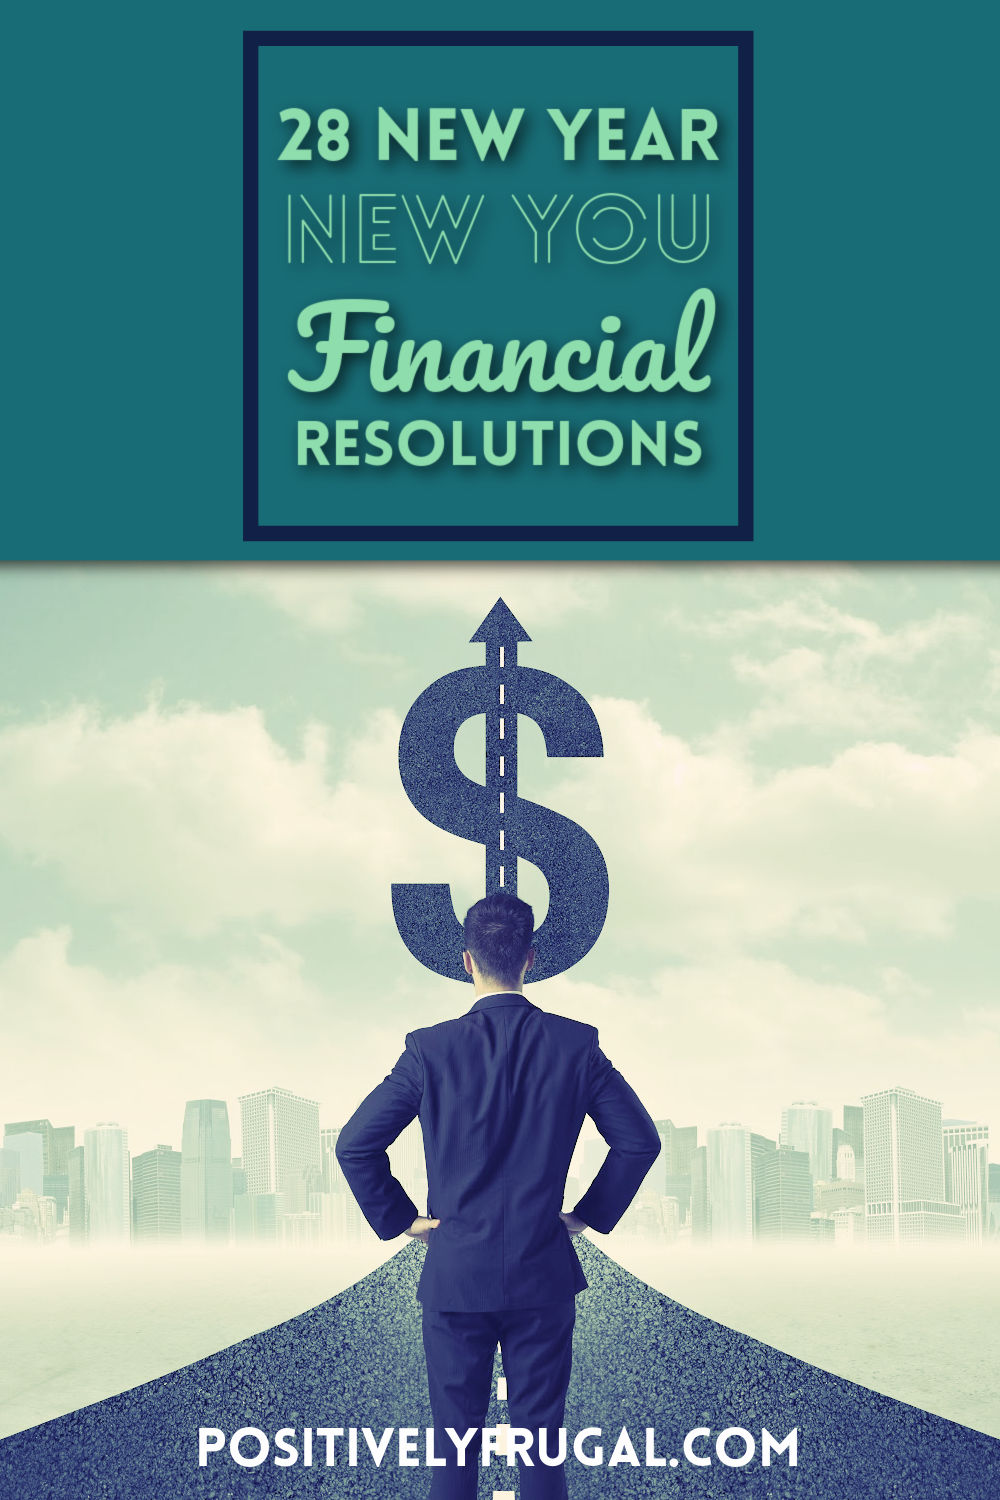 28 New Year New You Financial Resolutions by PositivelyFrugal.com